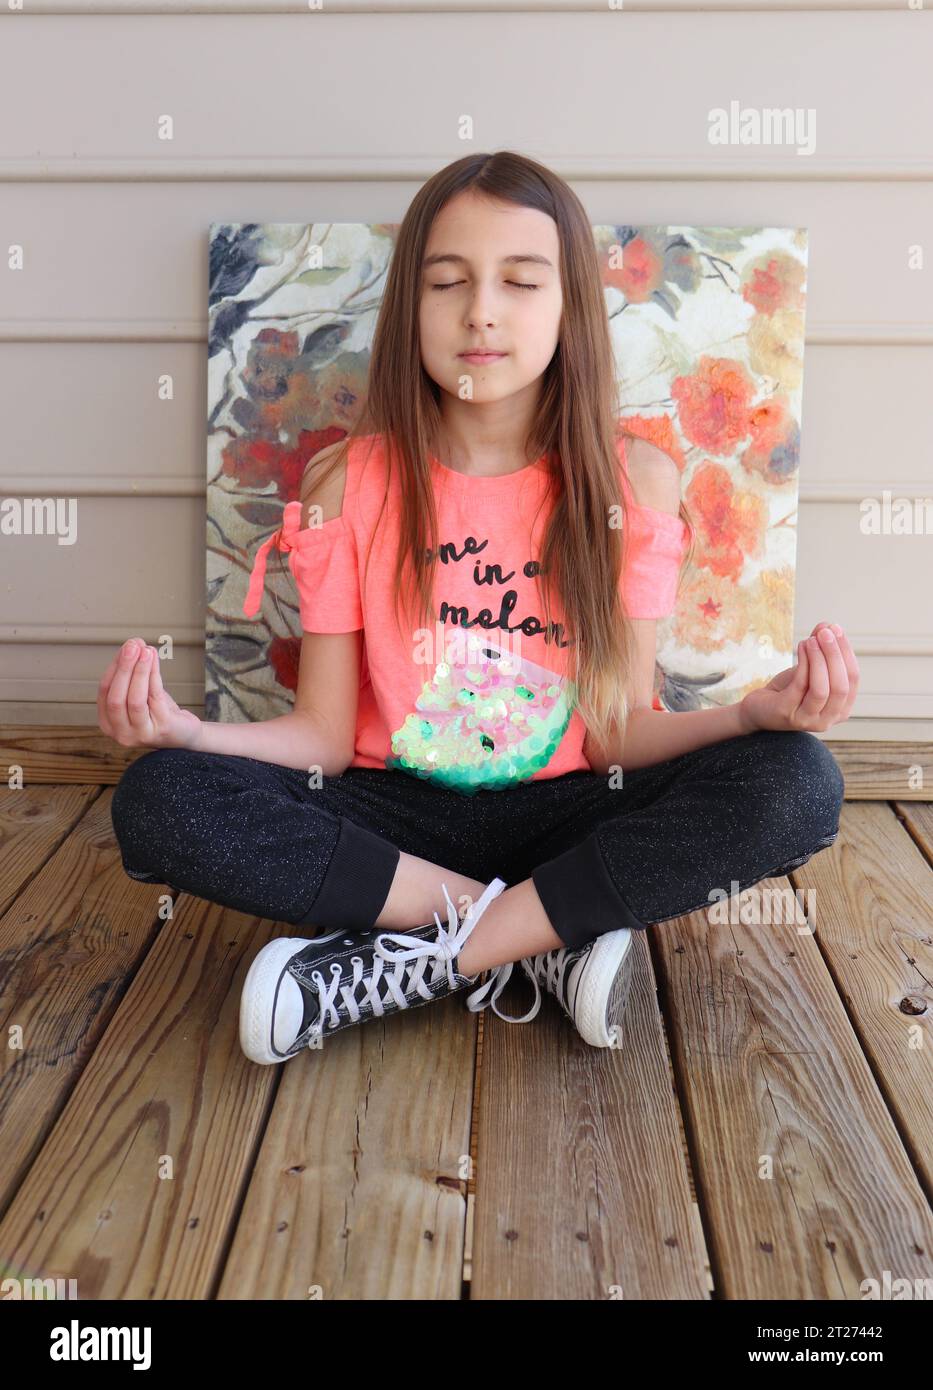 Young Girl Learns to Meditate Stock Photo